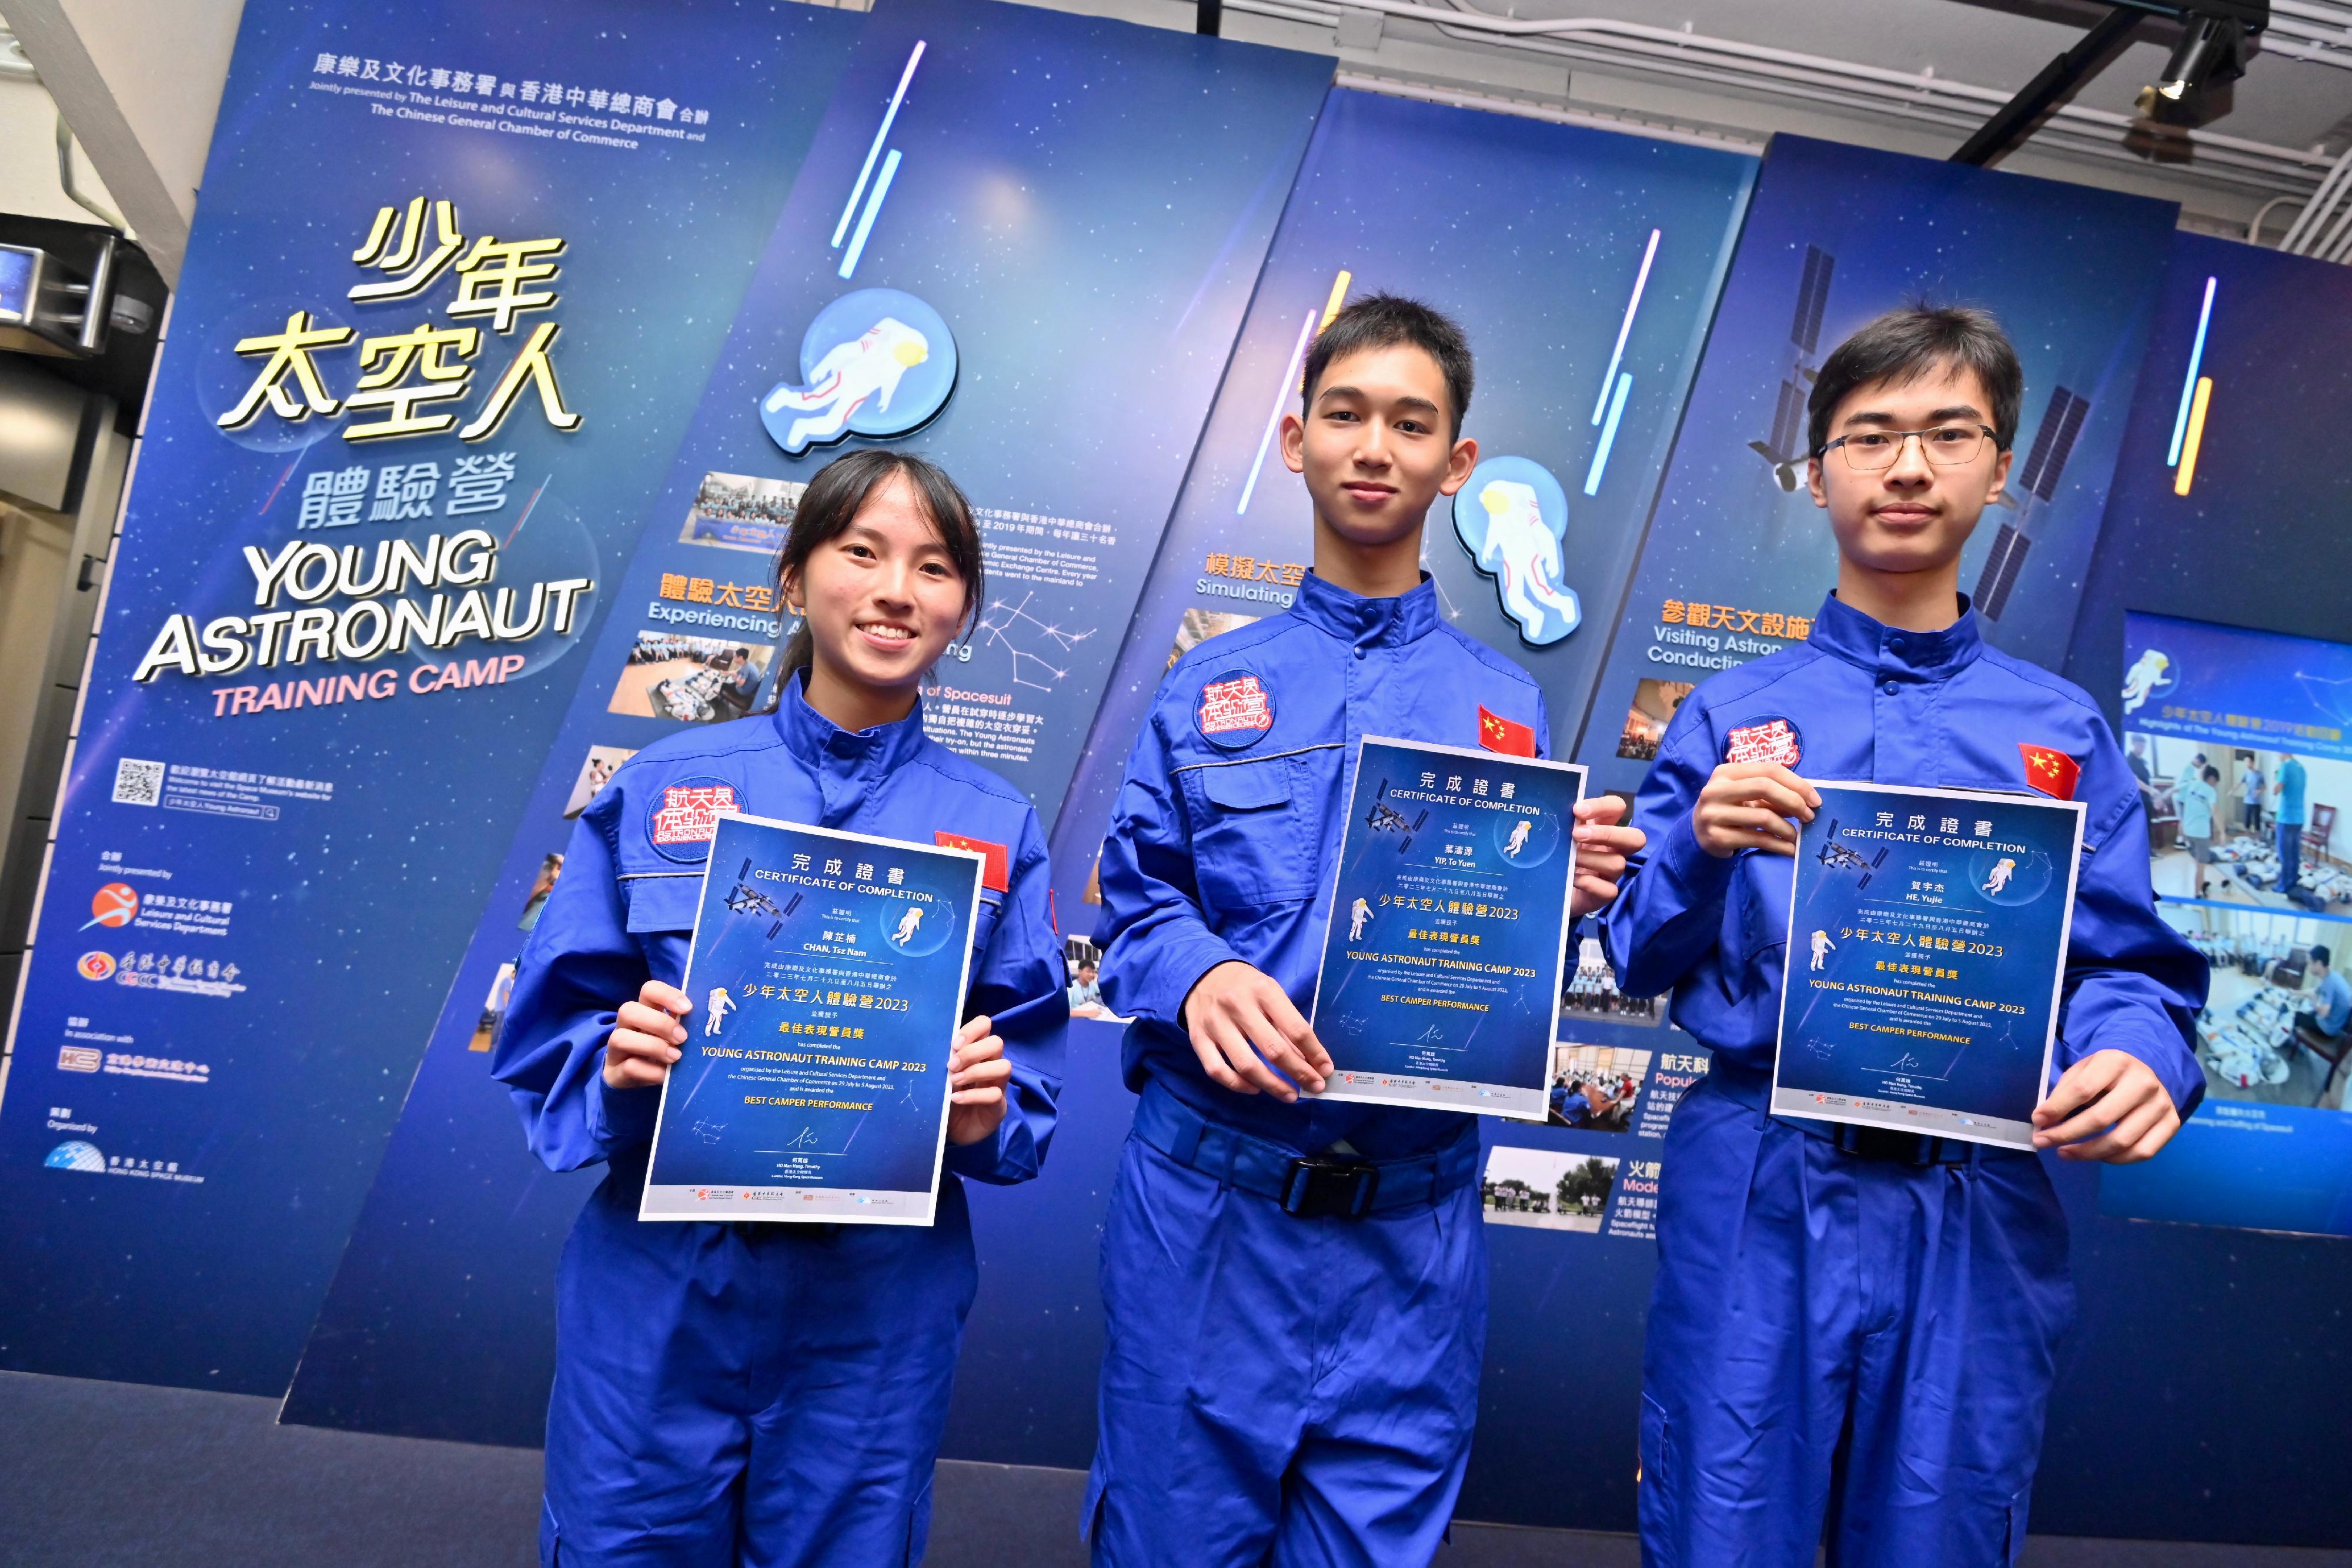 A sharing session for the Young Astronaut Training Camp 2023 was held at the Hong Kong Space Museum today (August 29). Photo shows the three students (from left) Chan Tsz-nam, Yip To-yuen and He Yujie who were honoured with Best Camper Performance awards for their outstanding efforts during the camp.